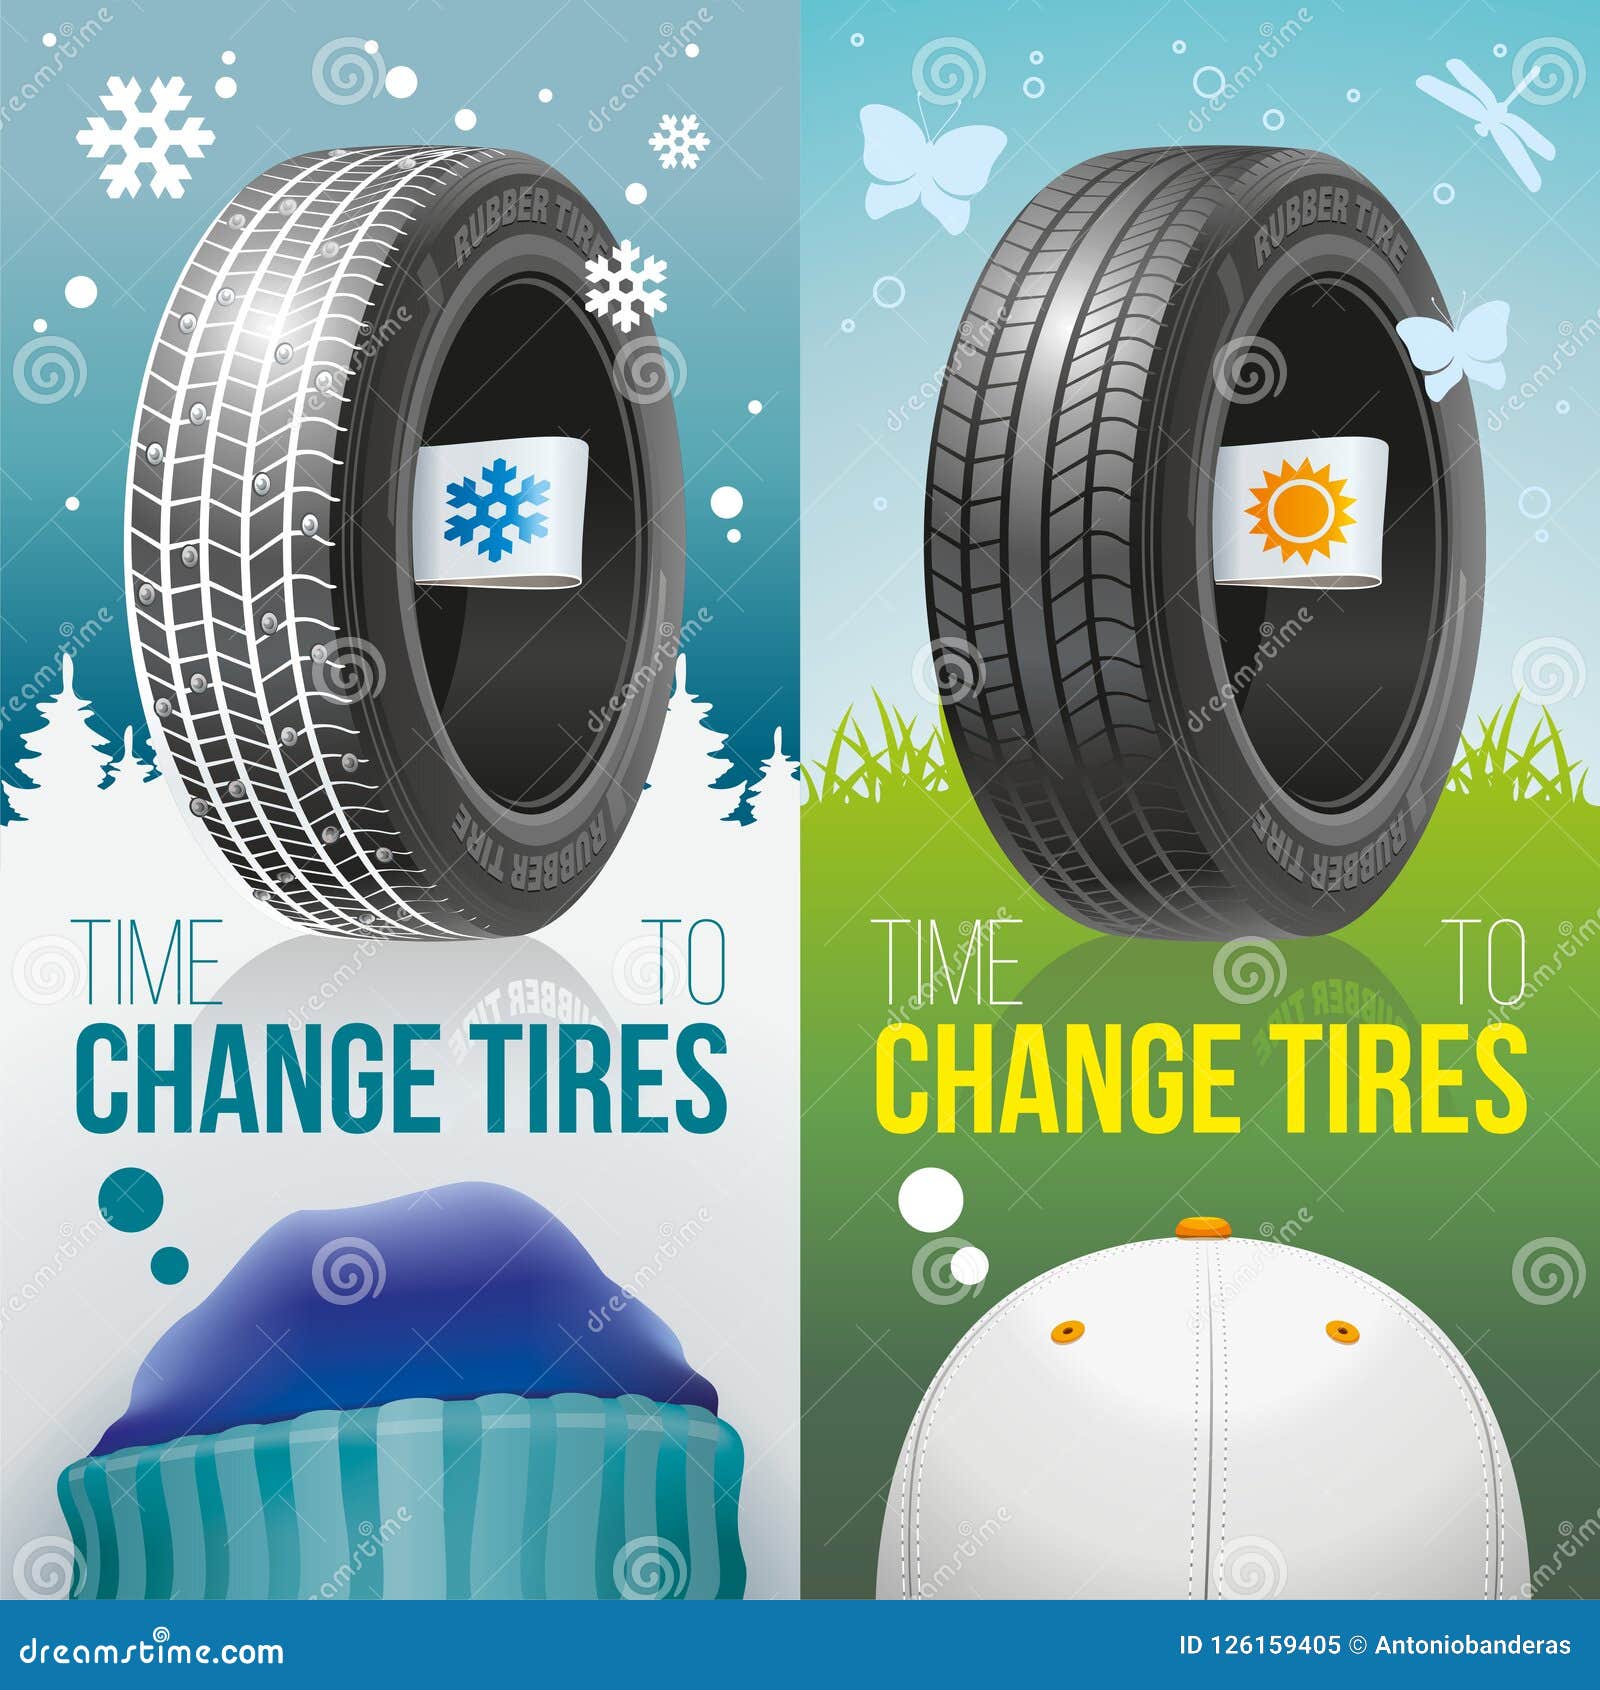 How to Change Winter Tires to Summer 